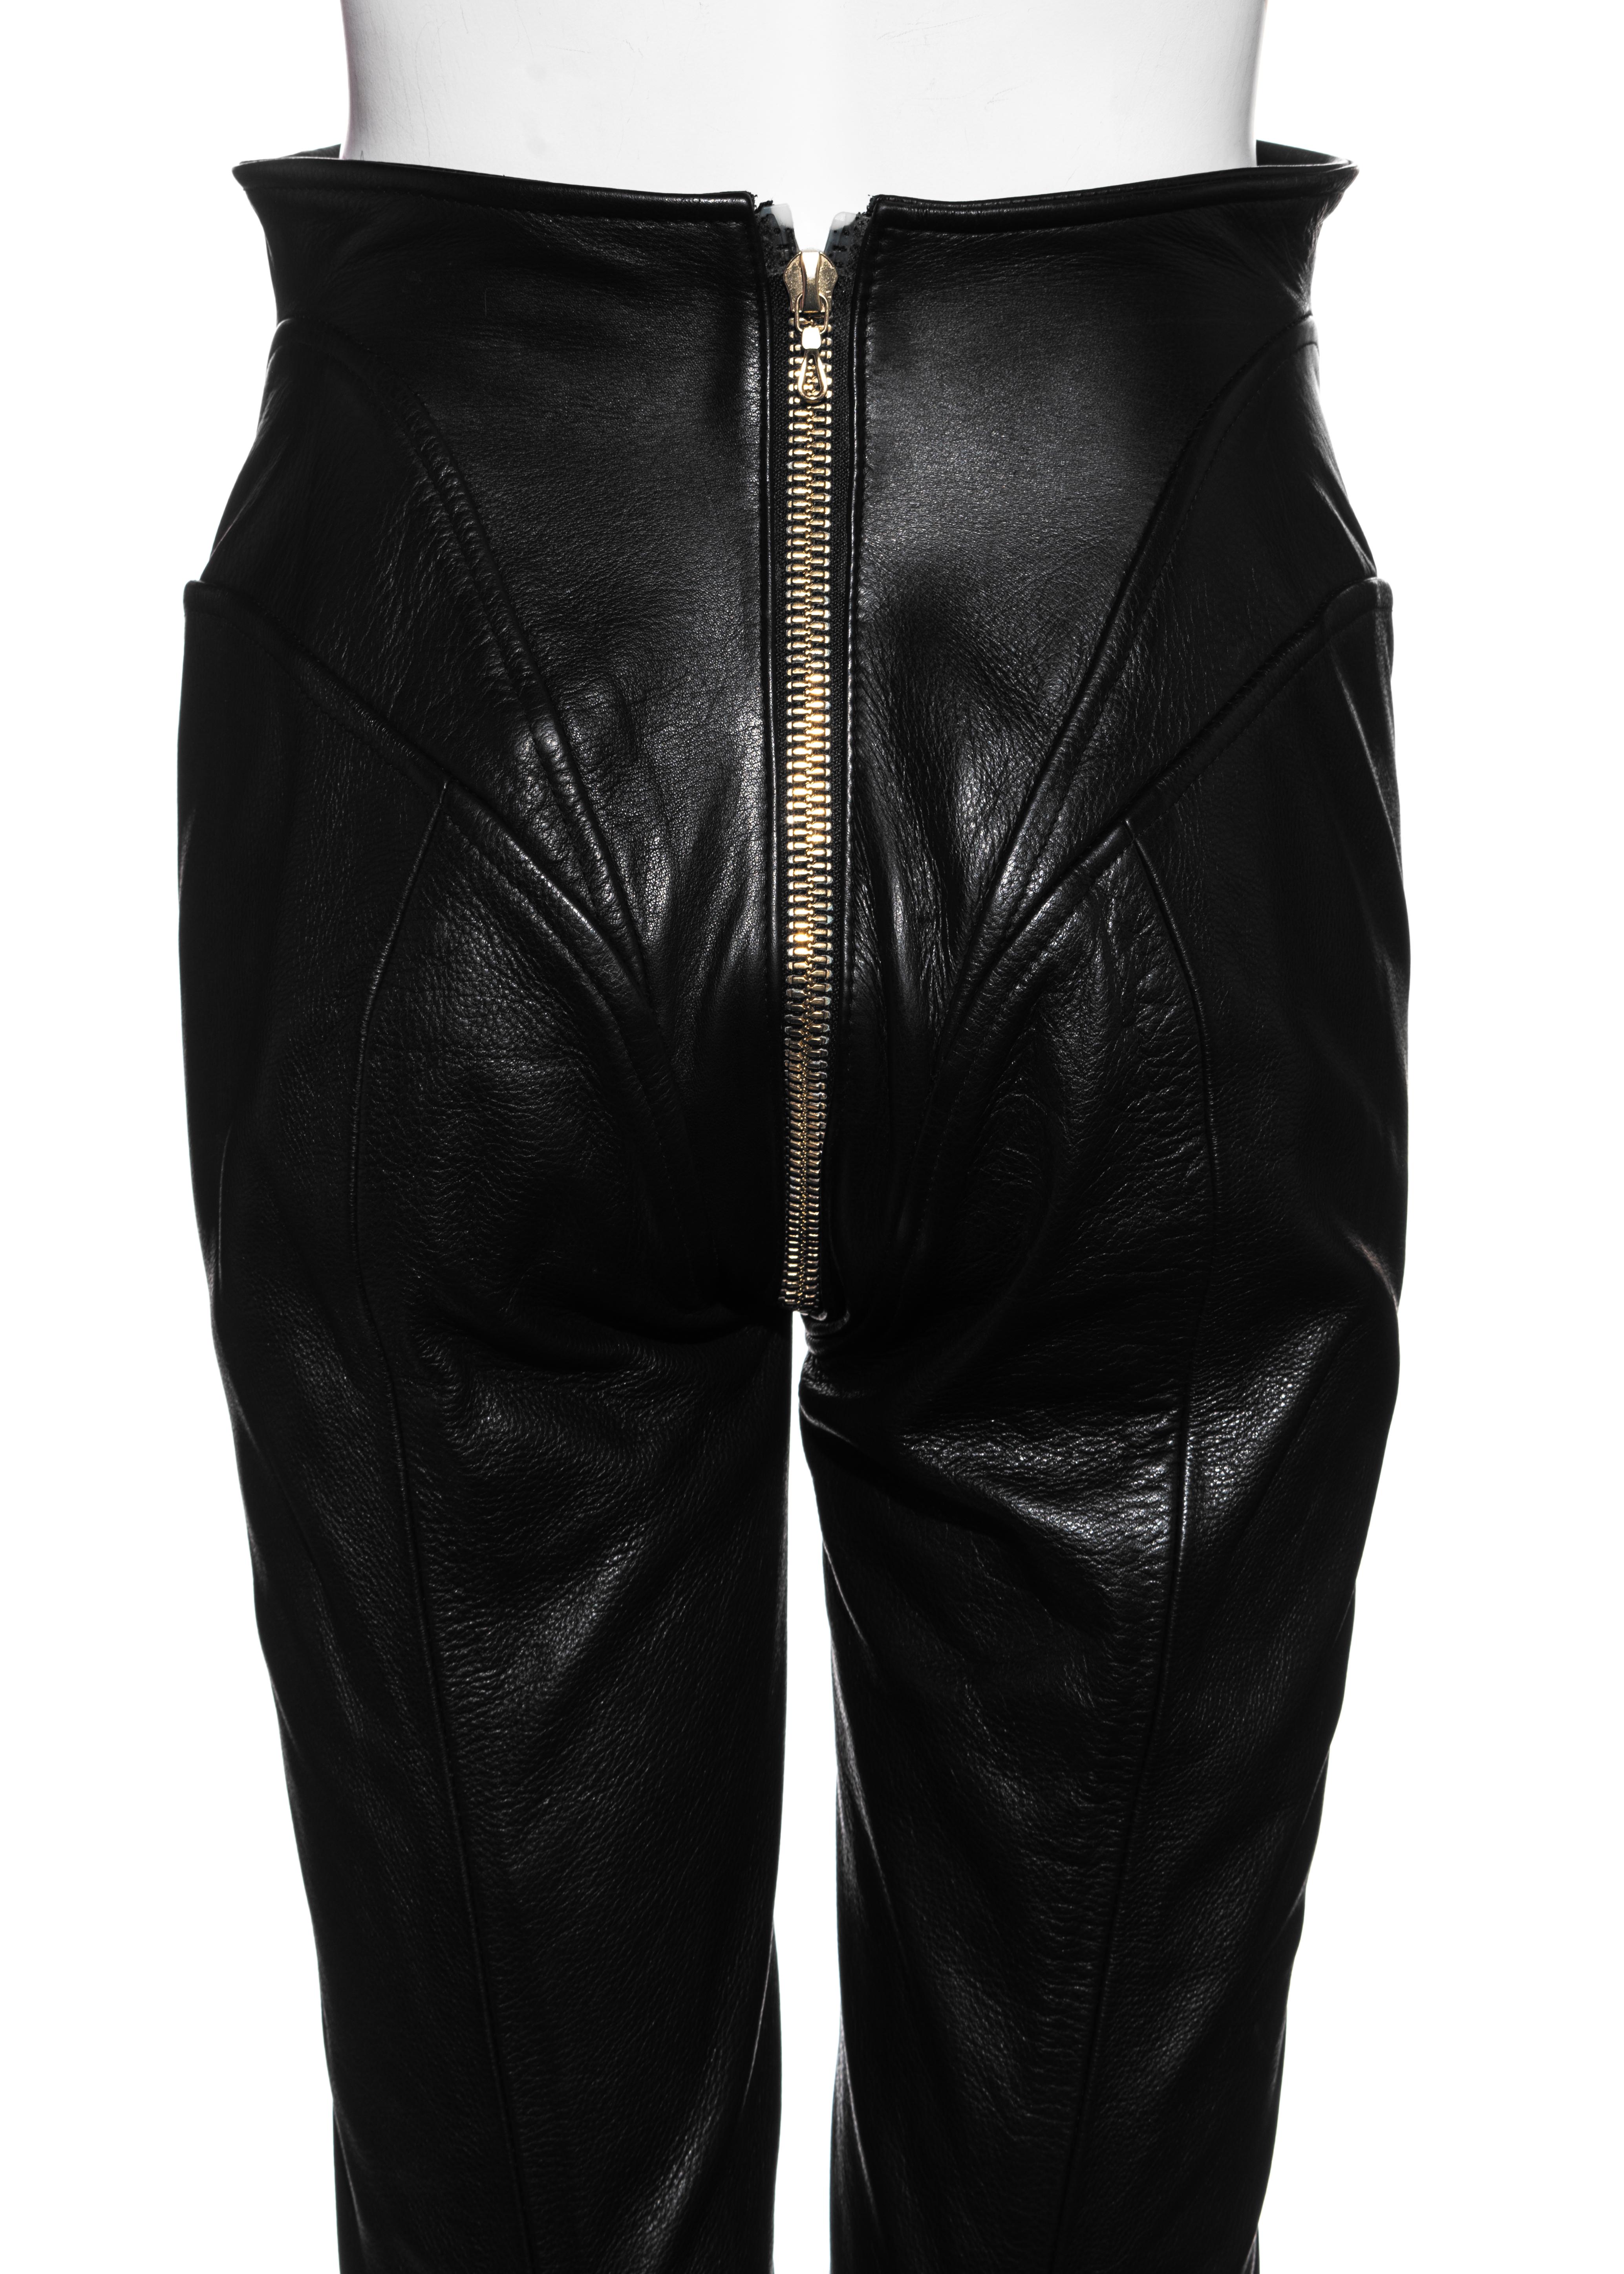 Women's Vivienne Westwood black leather corseted pants with crotch zipper, fw 1997 For Sale